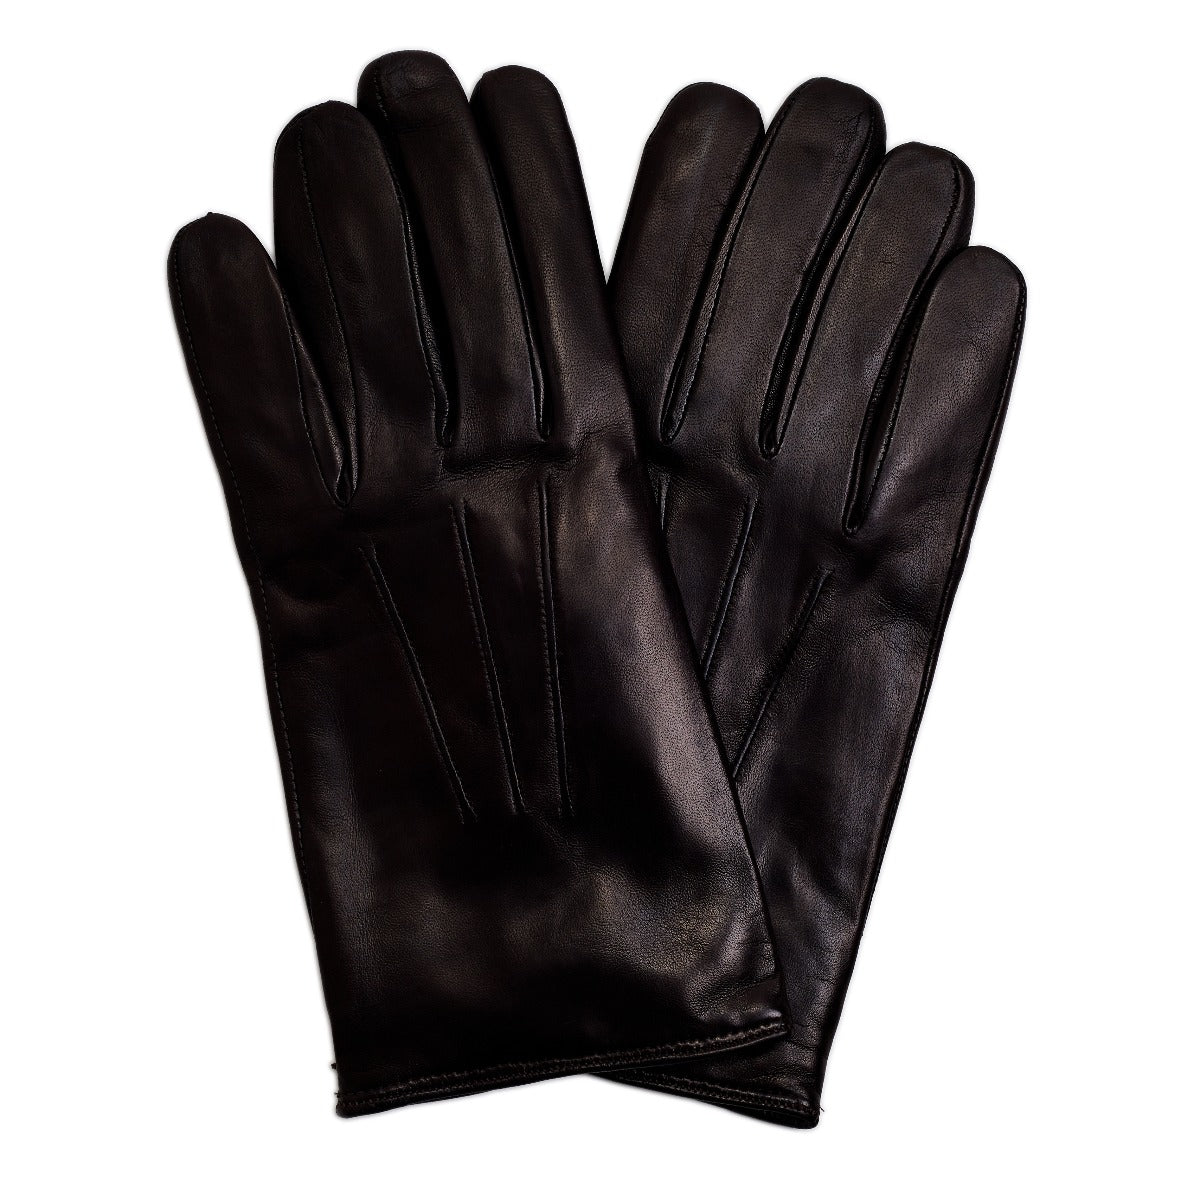 A pair of KirbyAllison.com Sovereign Grade Dark Brown Nappa Leather Gloves, Cashmere Lined.